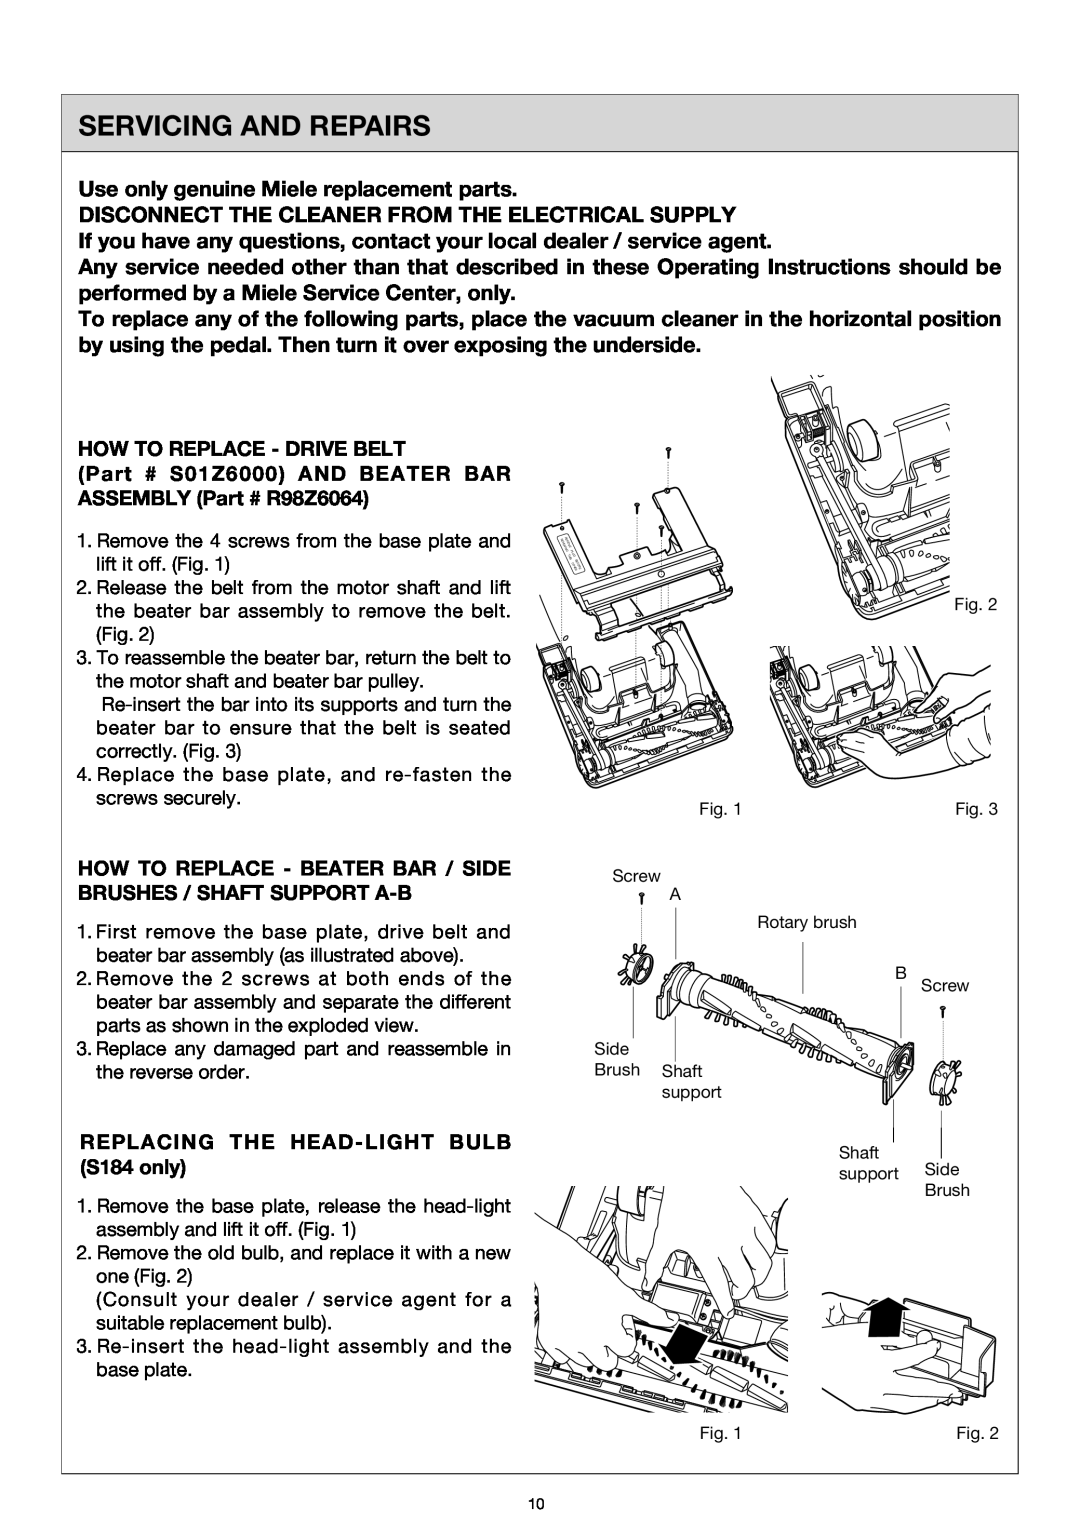 Miele S184, S183 important safety instructions Servicing And Repairs 